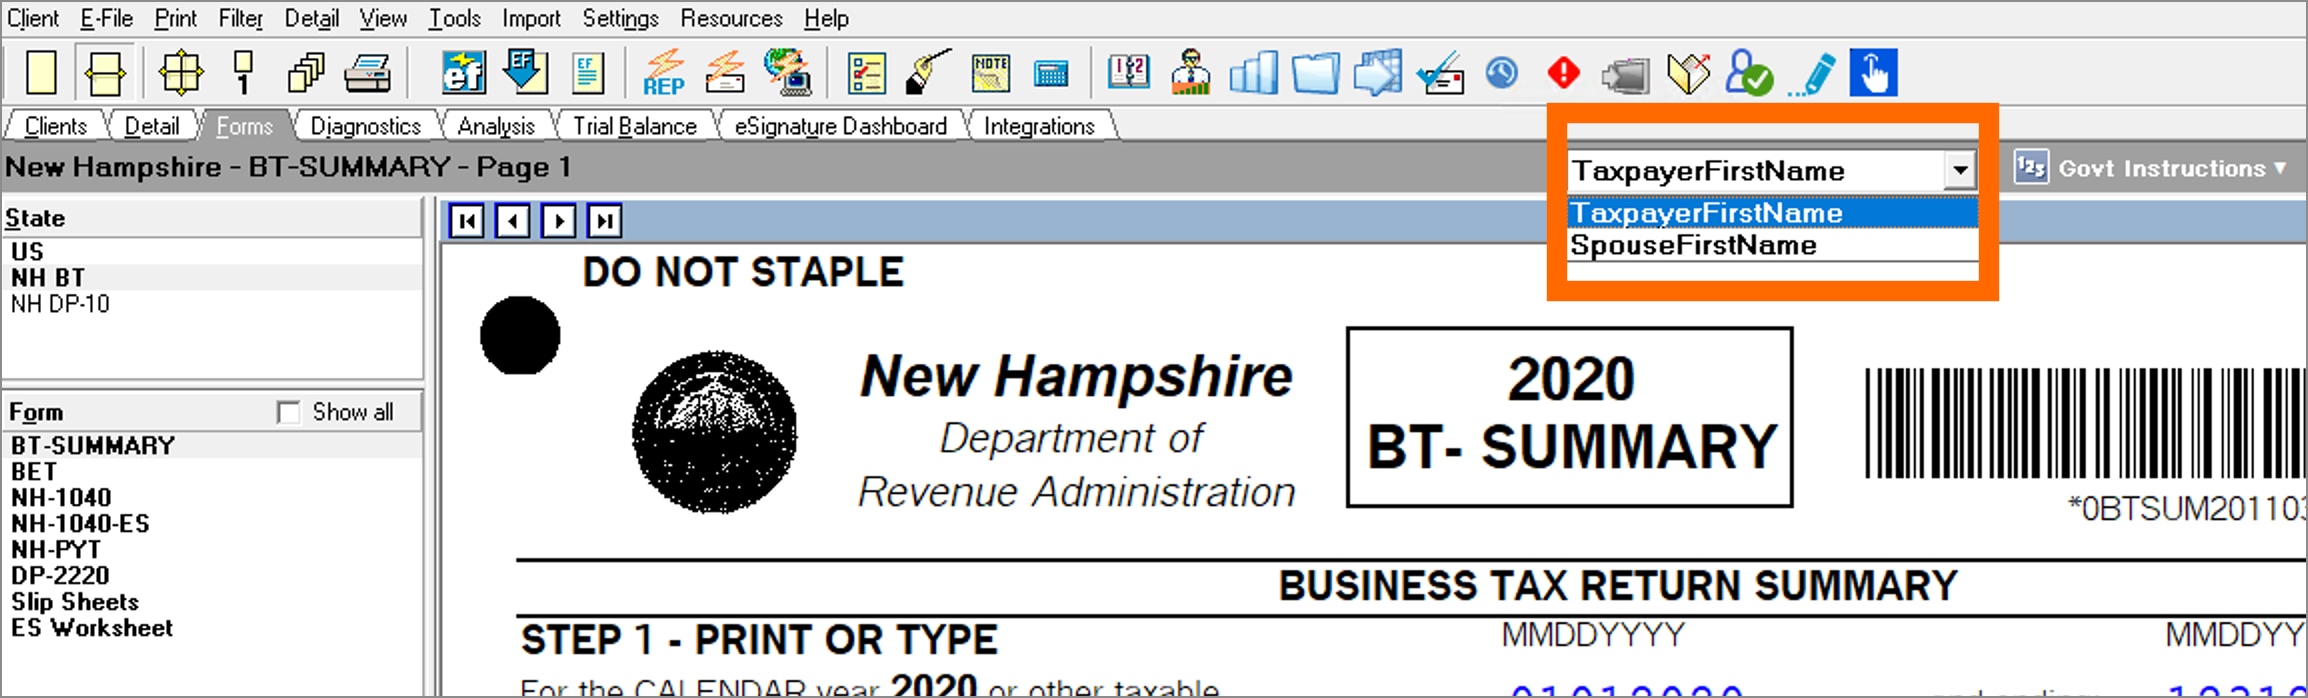 Image showing how to view Form BET in Lacerte from the New Hampshire - BT-SUMMARY page.